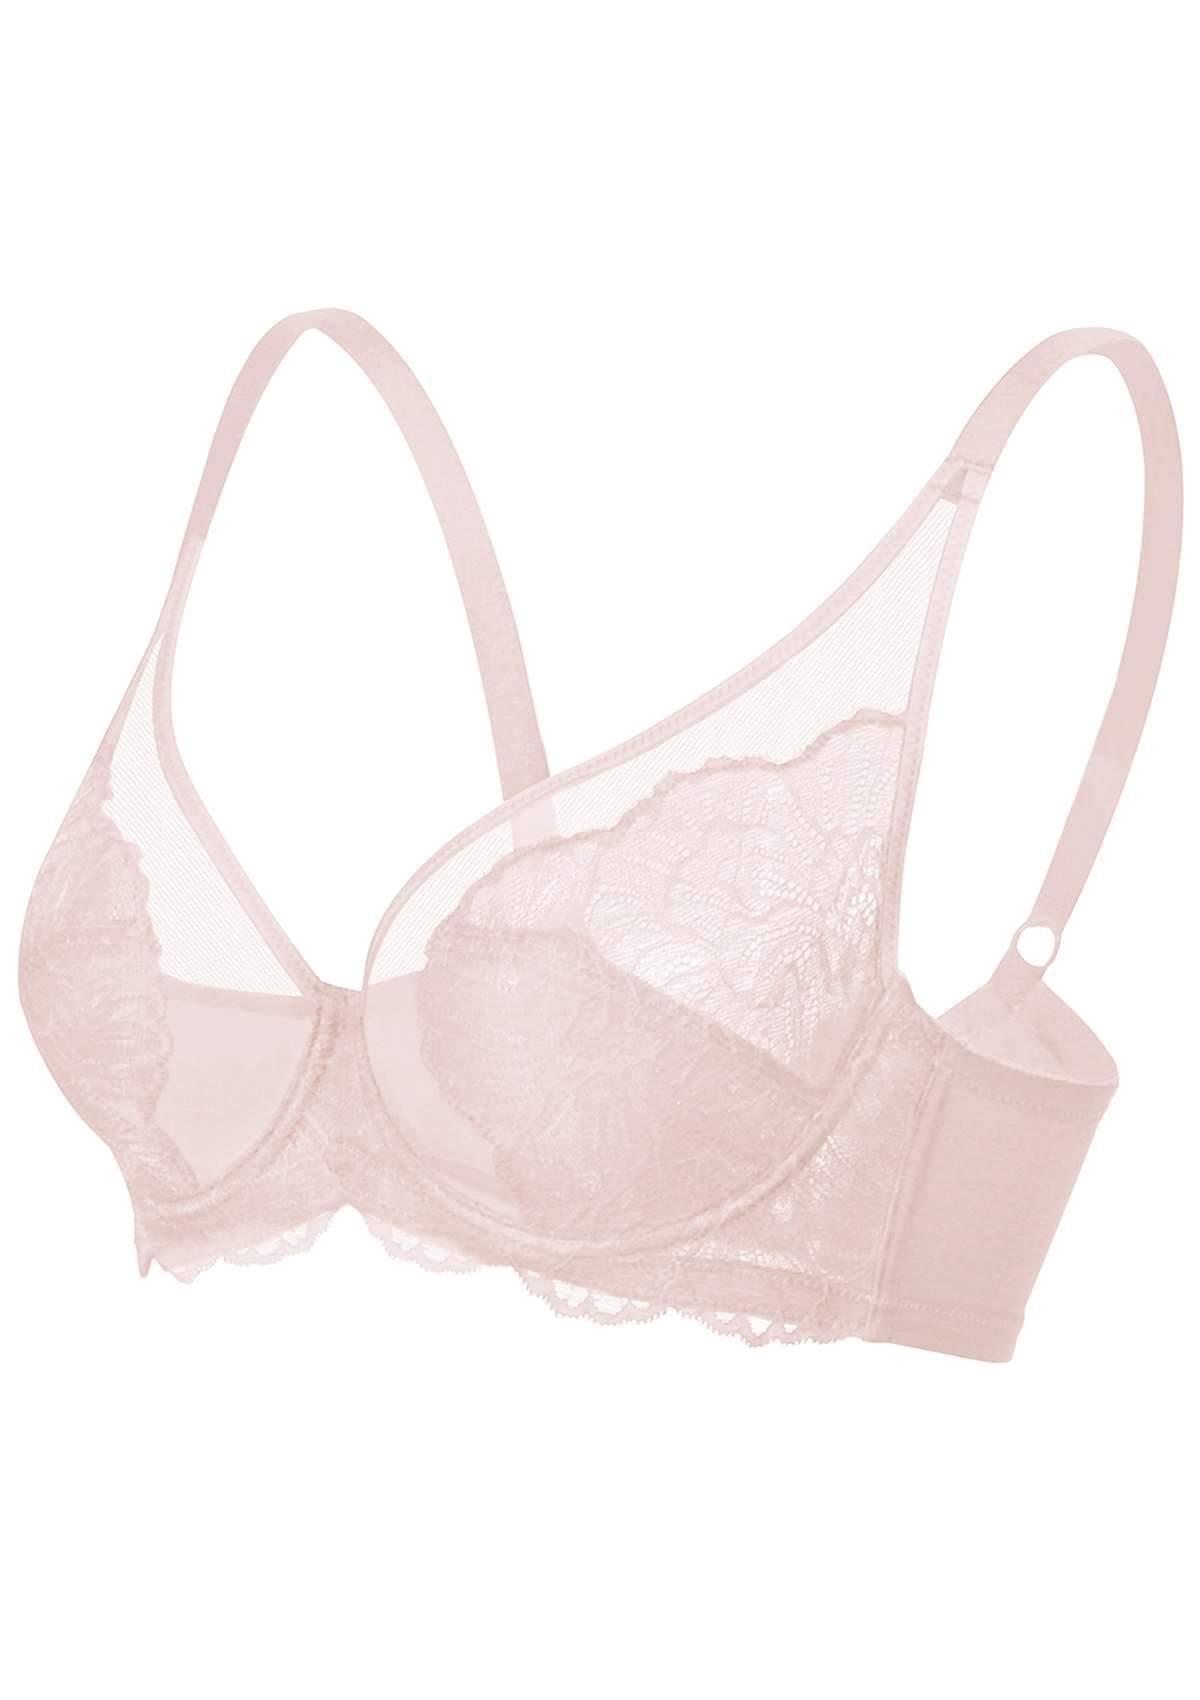 HSIA Blossom Lace Bra And Panties Set: Best Bra For Large Busts - Dark Pink / 38 / D